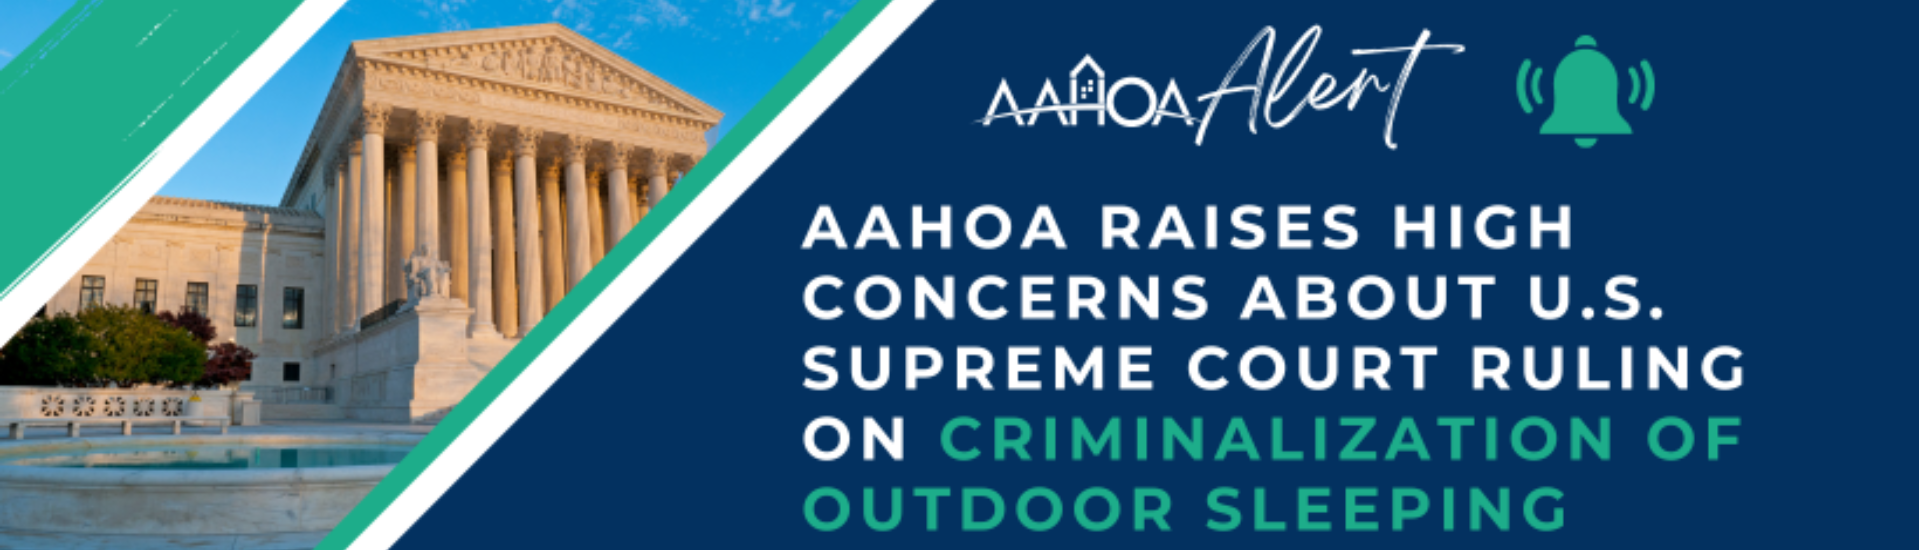 AAHOA Raises High Concerns about U.S. Supreme Court Ruling on Criminalization of Outdoor Sleeping